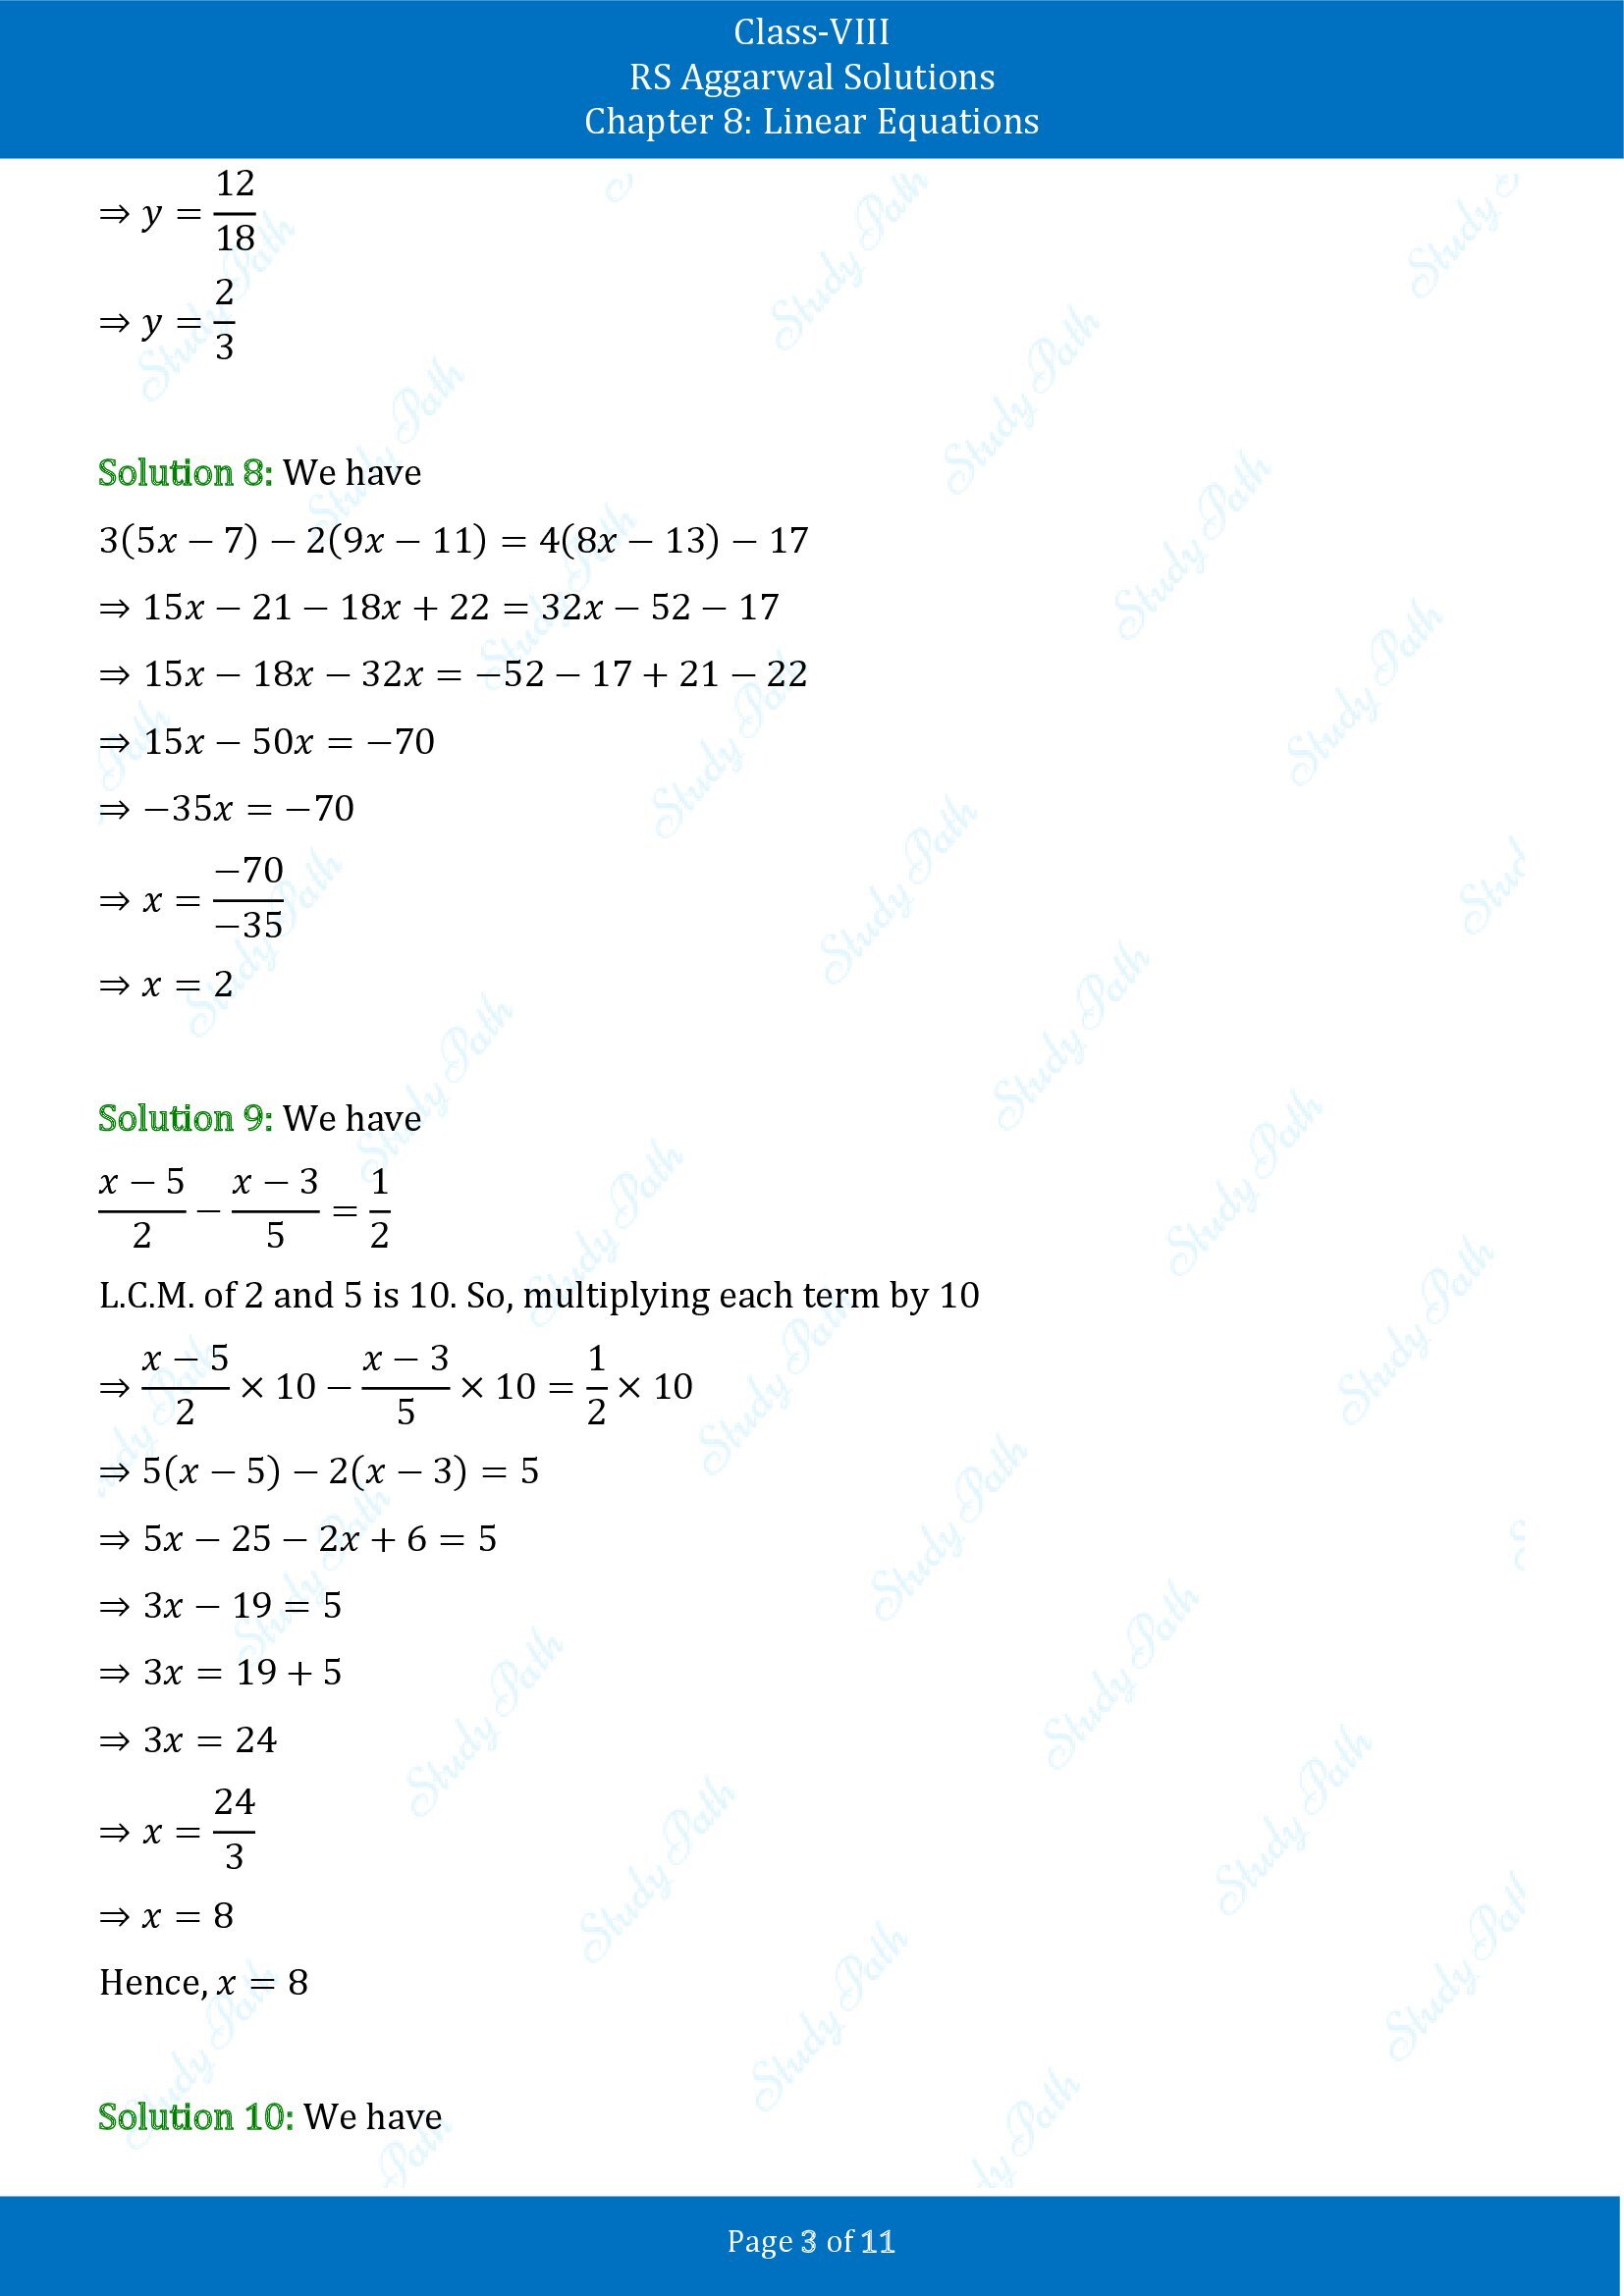 RS Aggarwal Solutions Class 8 Chapter 8 Linear Equations Exercise 8A 00003